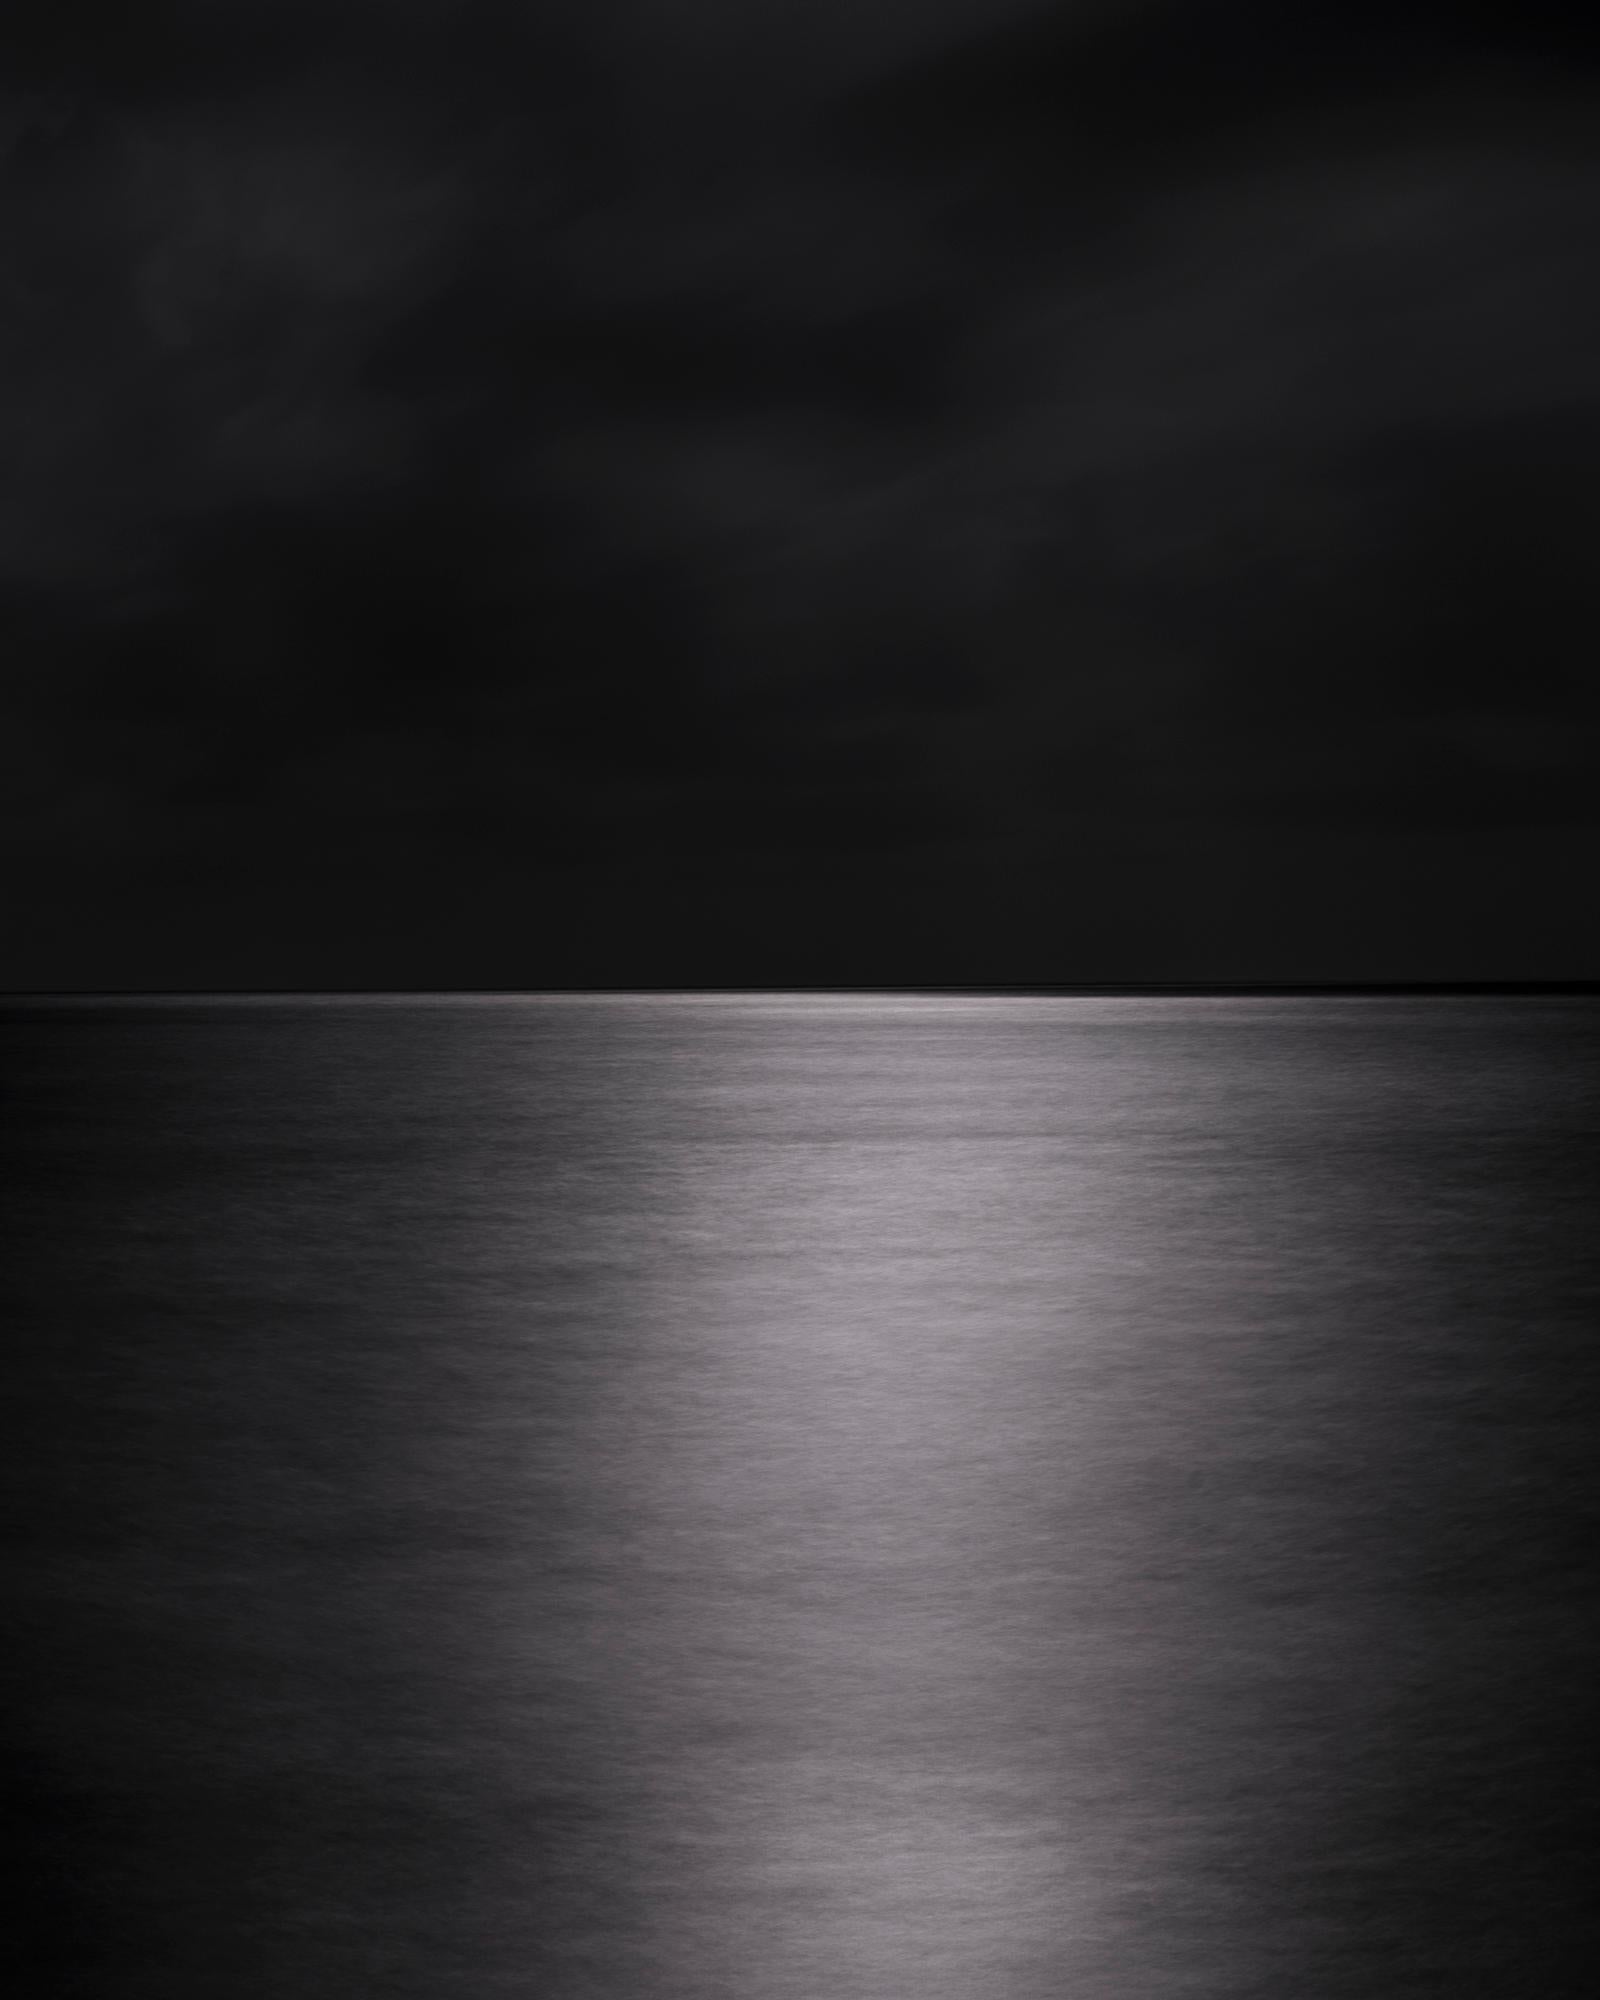 Moonrise I Cauquenes, From the Series Mares